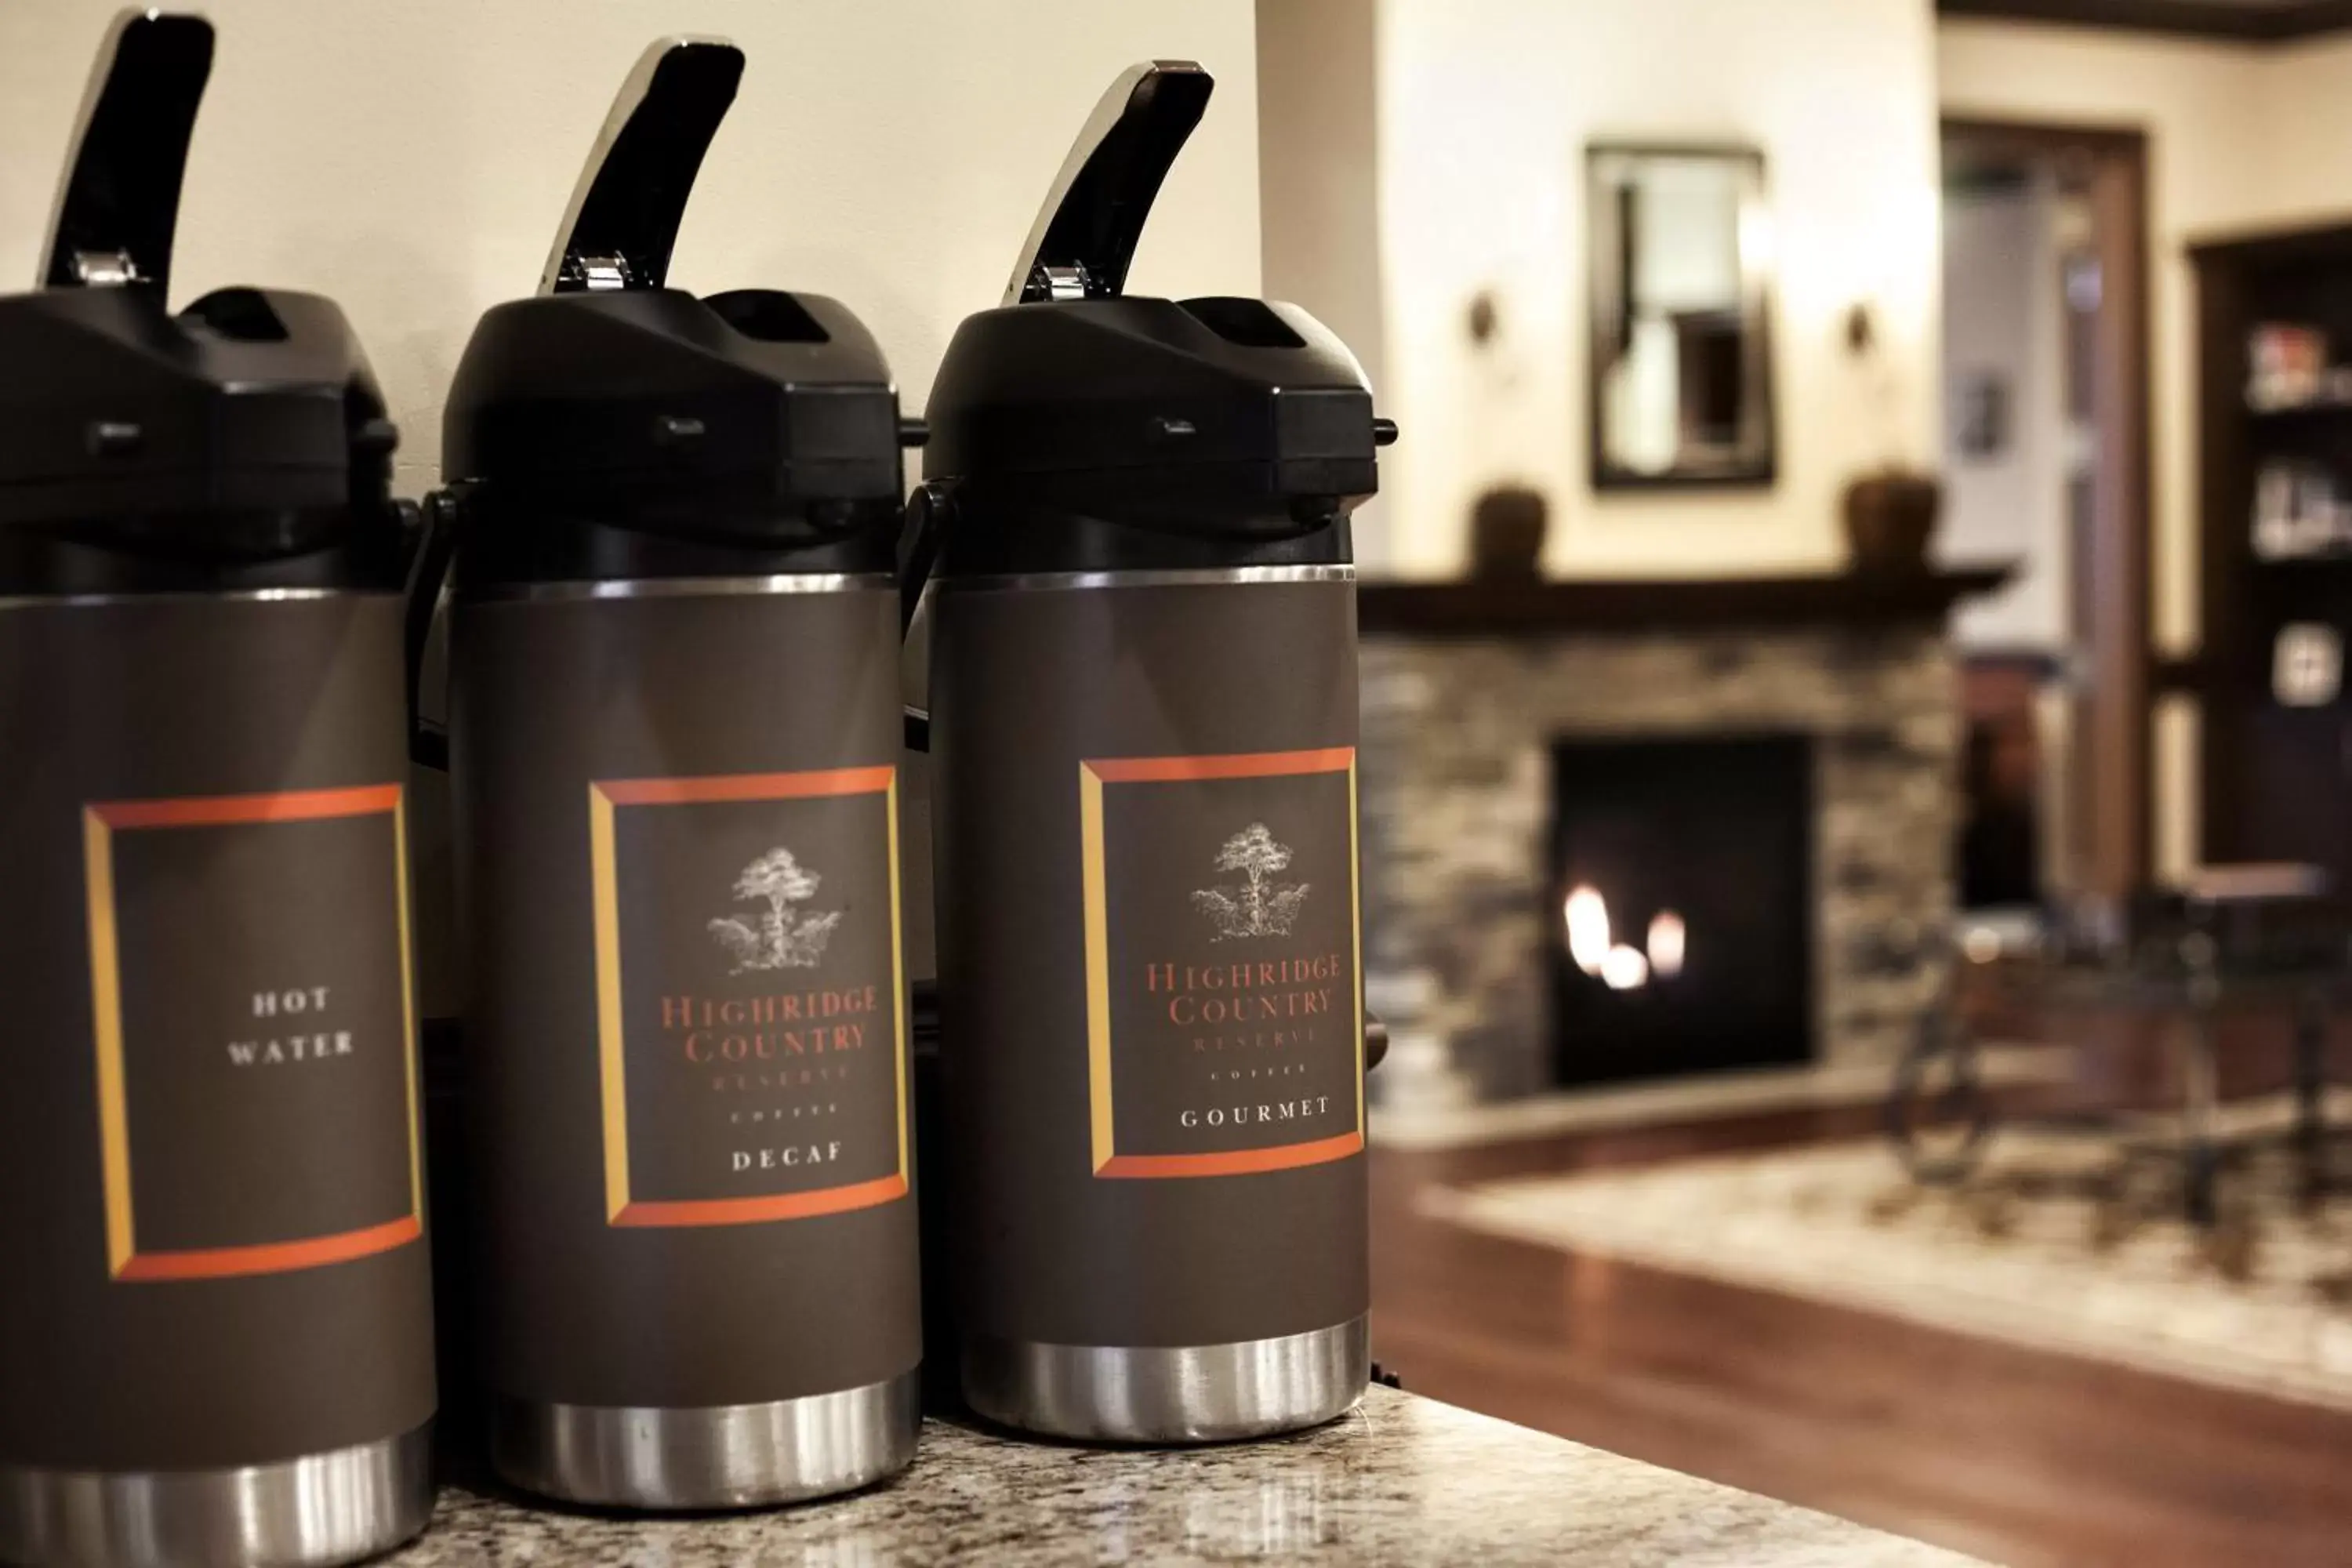 Coffee/Tea Facilities in Country Inn & Suites by Radisson, Traverse City, MI